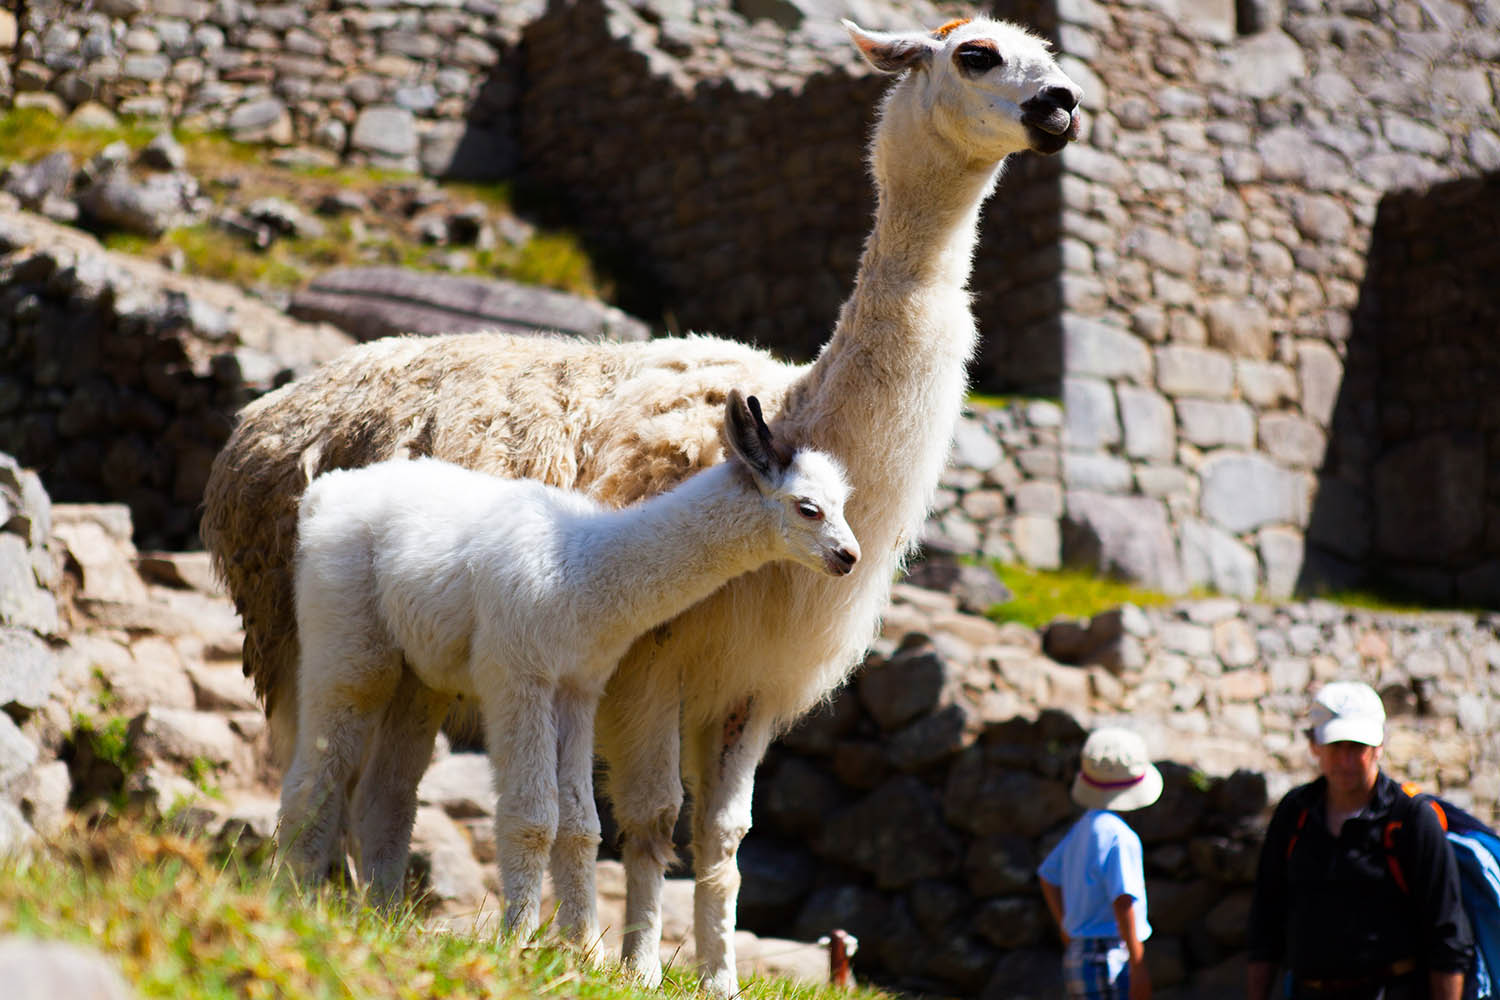 Mother and child alpaca watching tourists